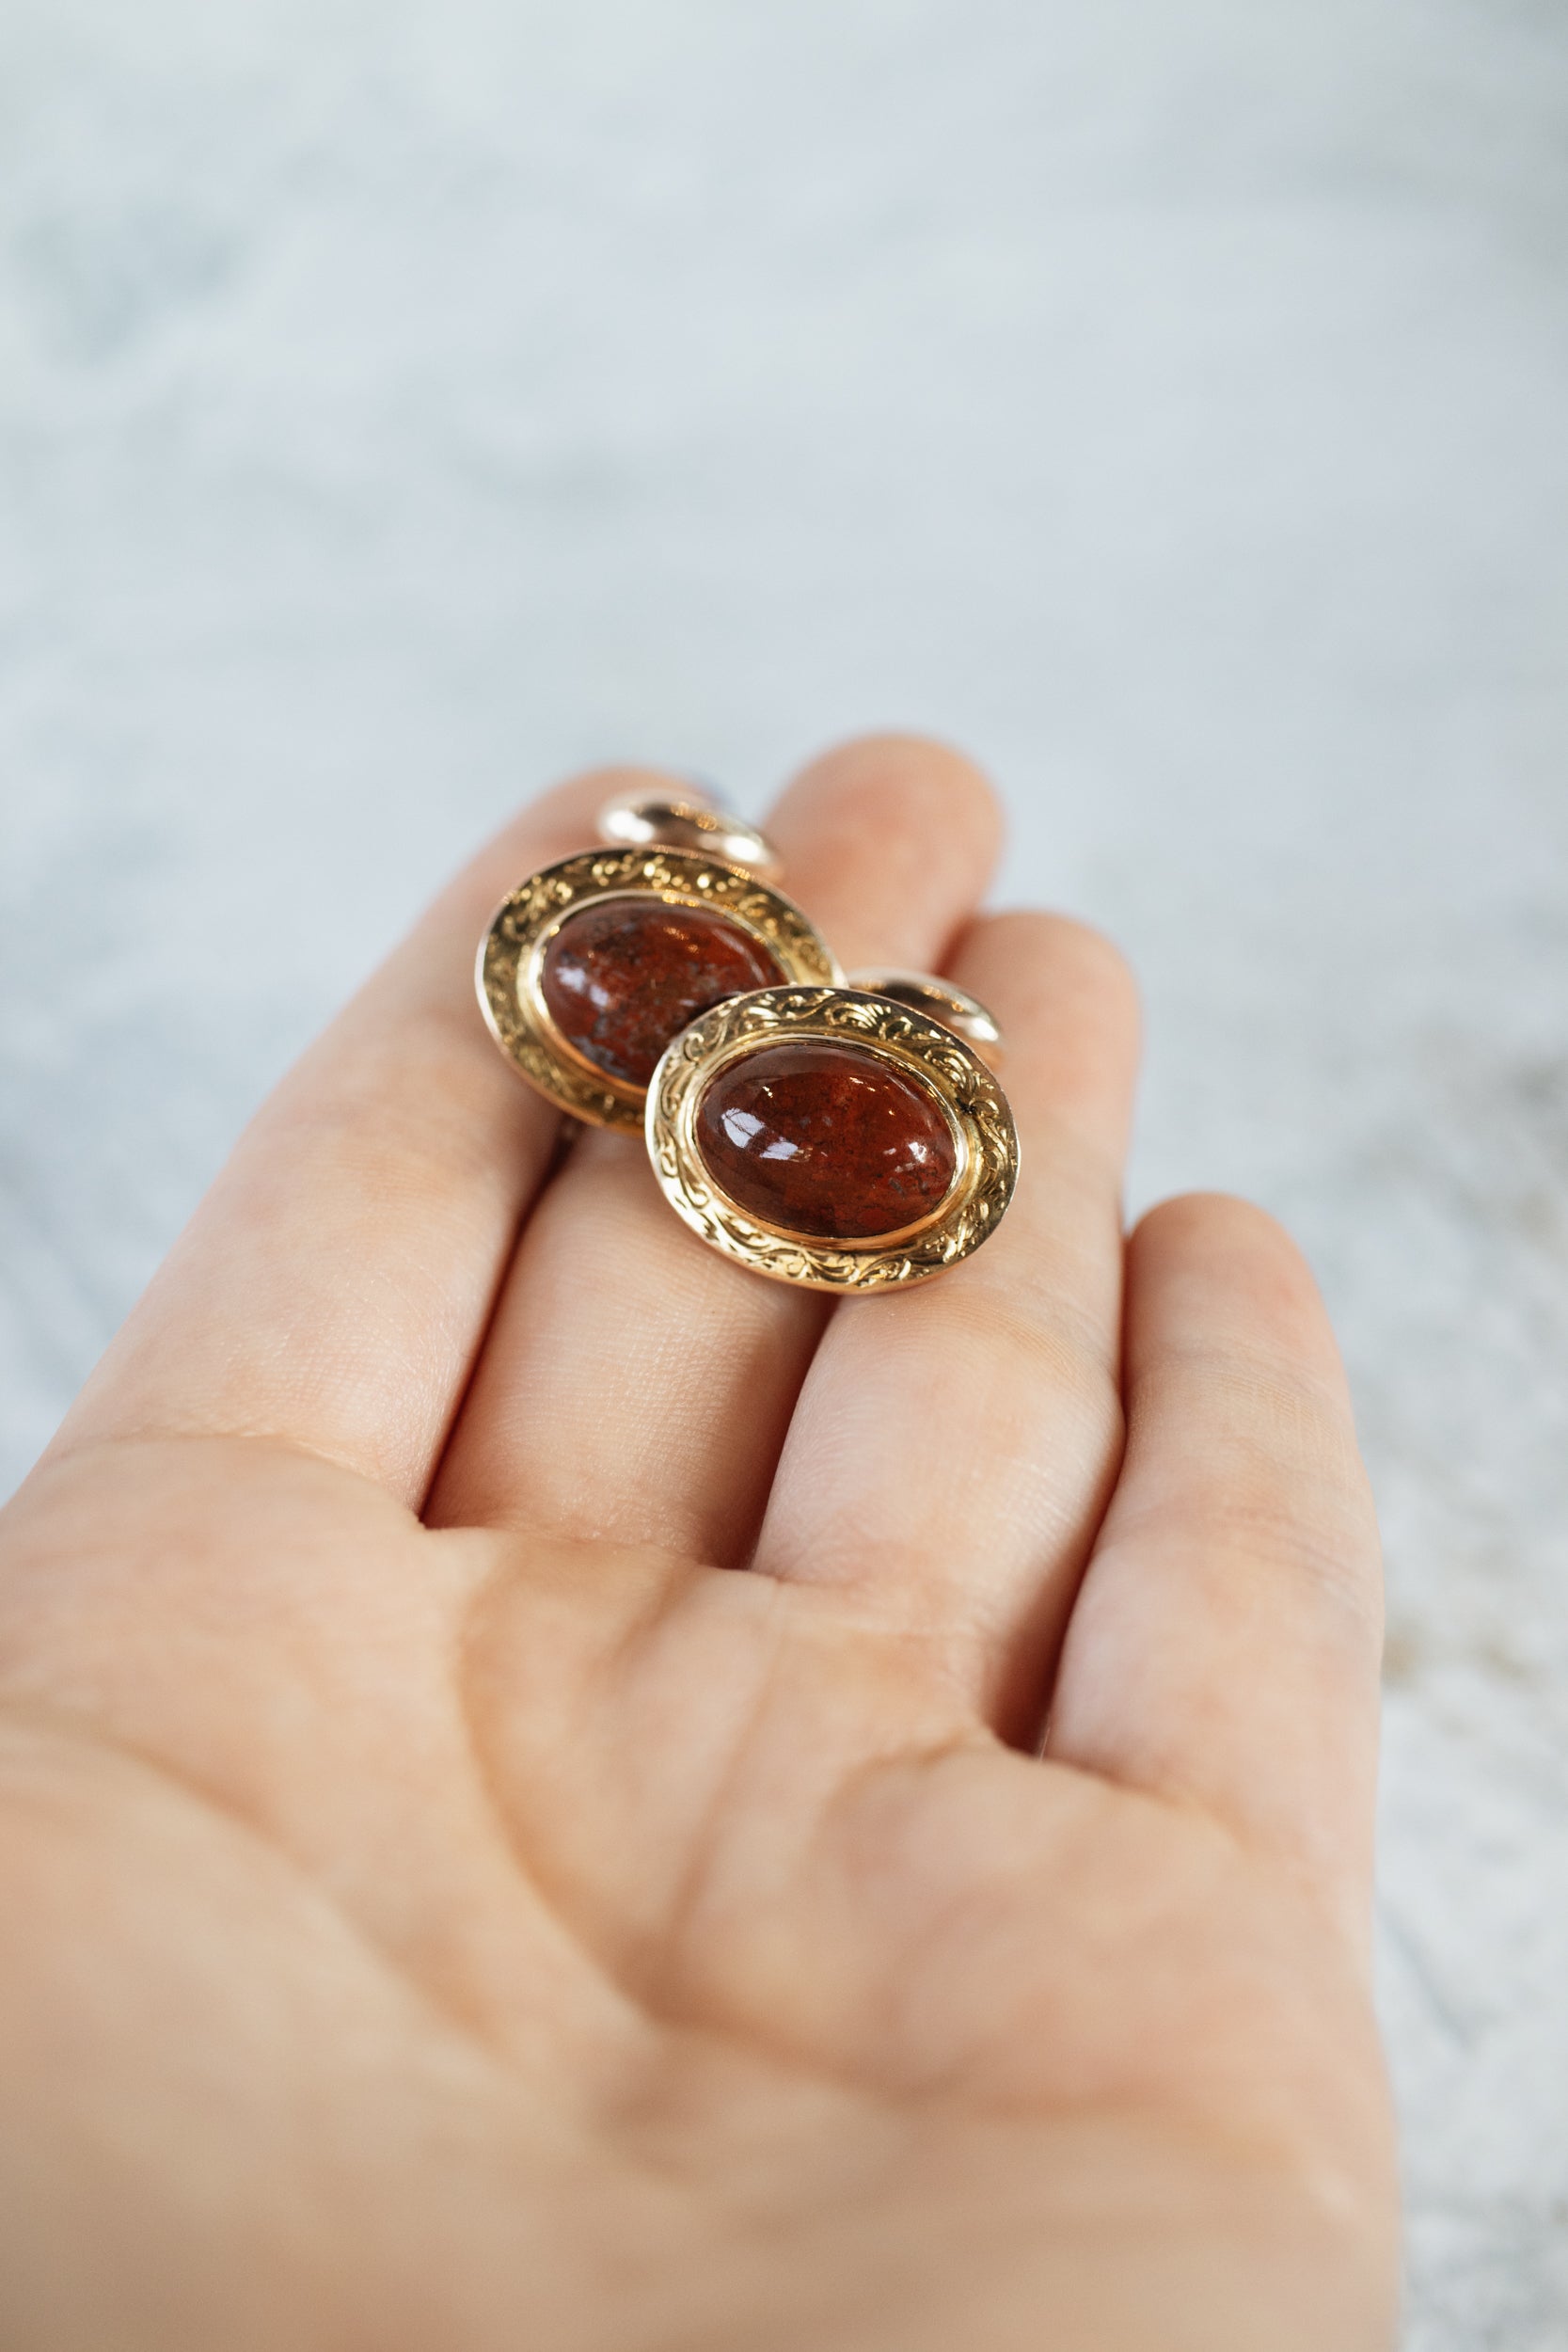 Victorian Cufflinks with Red Jasper and 10k Yellow Gold